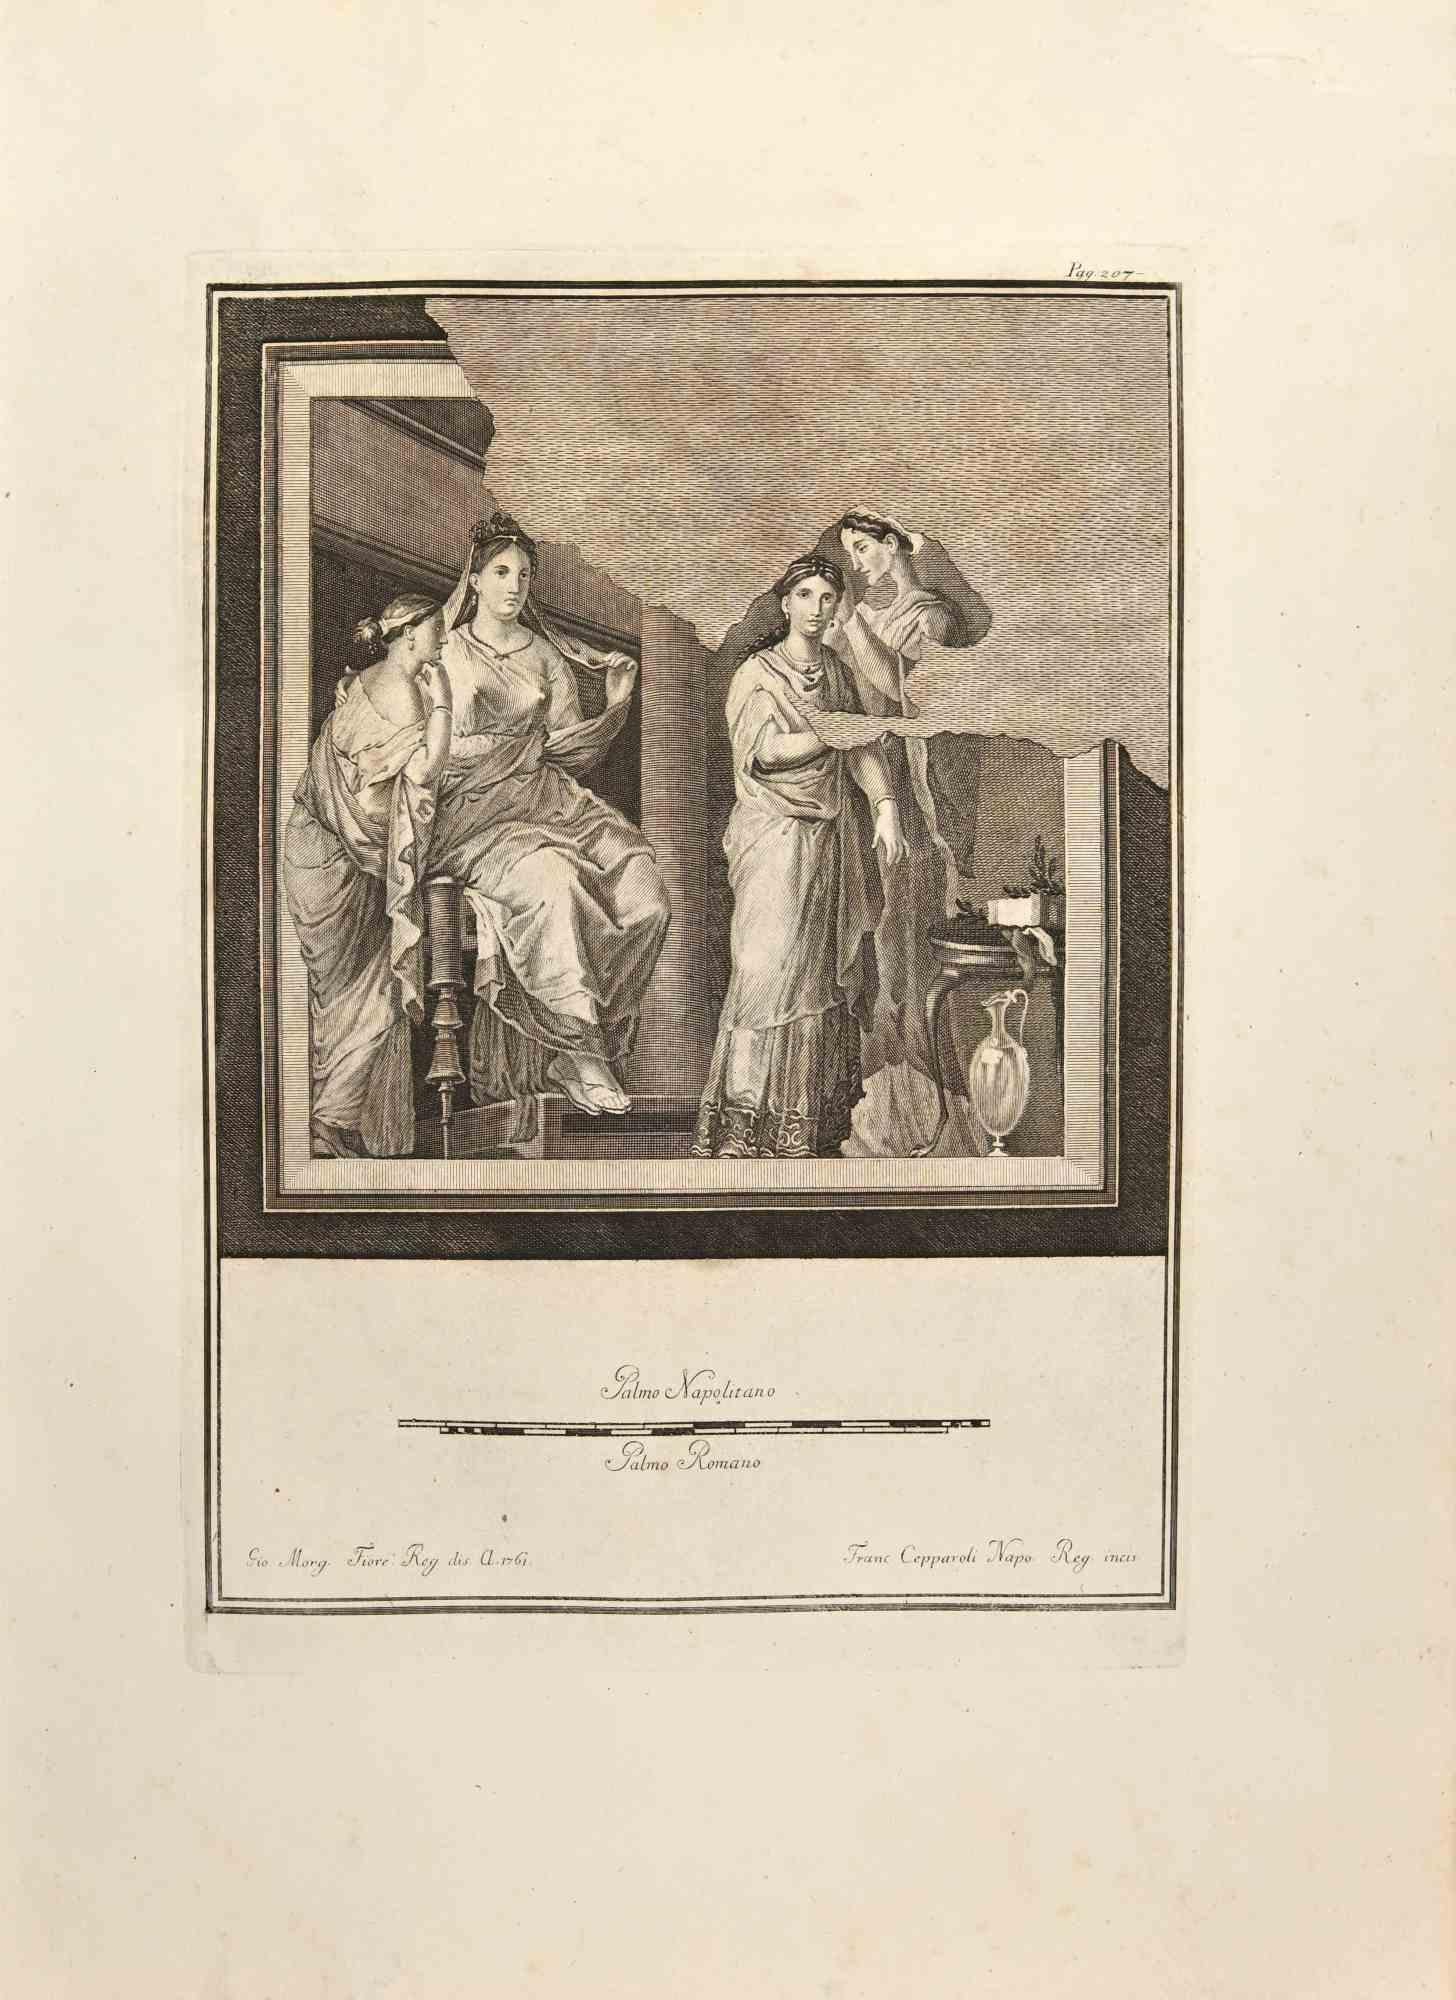 Ancient Roman Fresco from "Antiquities of Herculaneum" is an etching on paper realized by Francesco Cepparoli in the 18th Century.

Signed on the plate.

Good conditions.

The etching belongs to the print suite “Antiquities of Herculaneum Exposed”